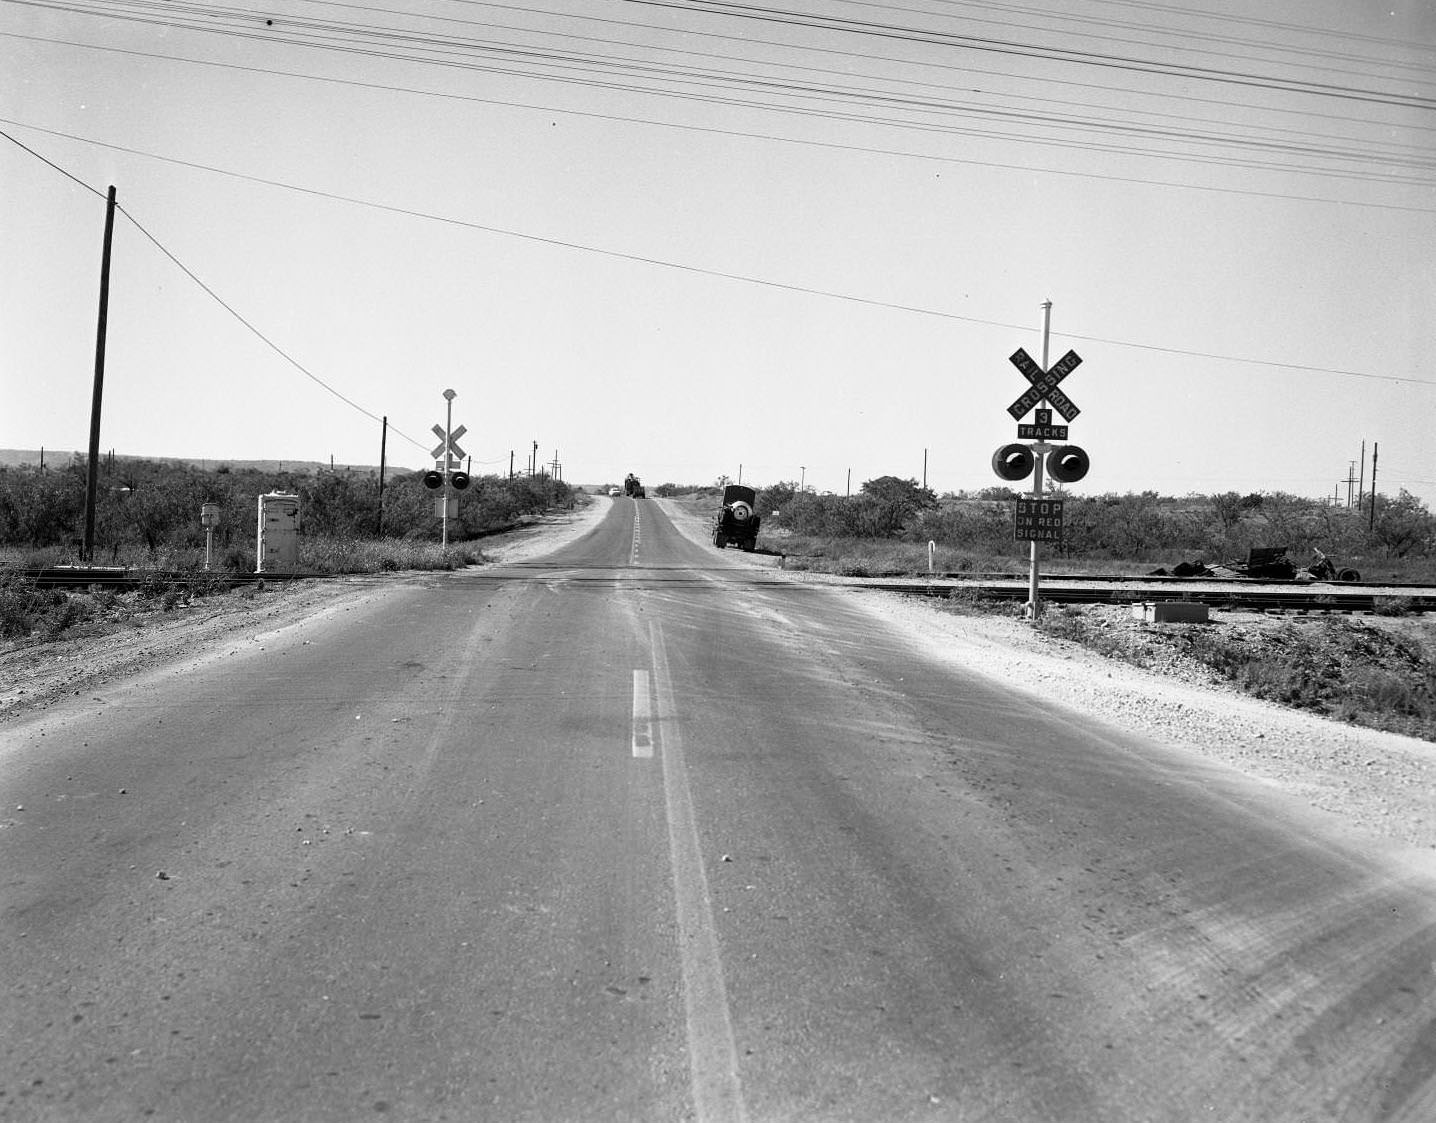 A highway accident scene and a railroad crossing. There is a truck parked on the right side of the road, 1955